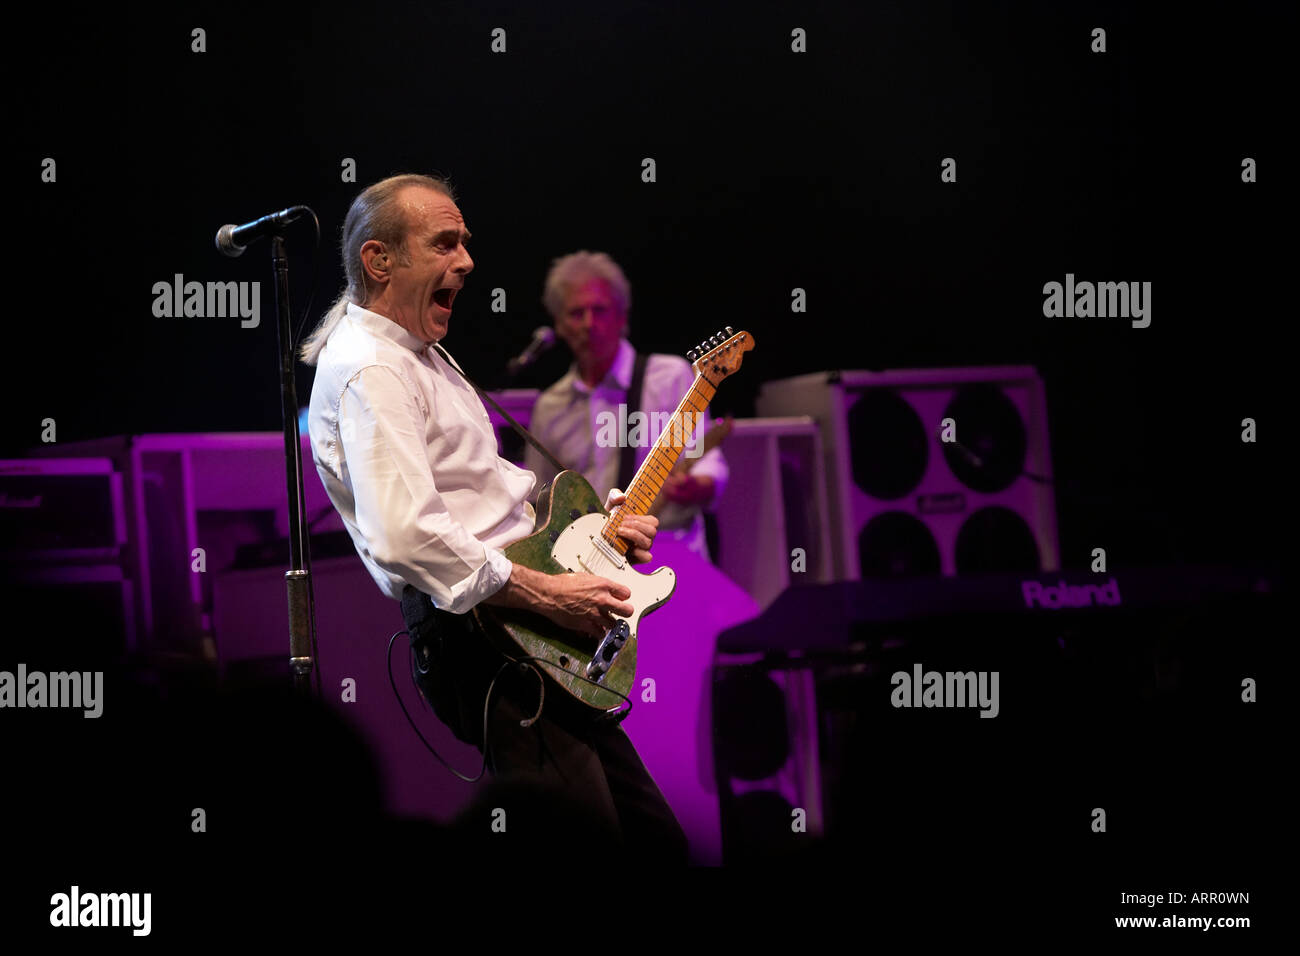 Francis Rossi and musician John Rhino Edwards of rock band Status Quo play guitar during gig on European tour in France Stock Photo